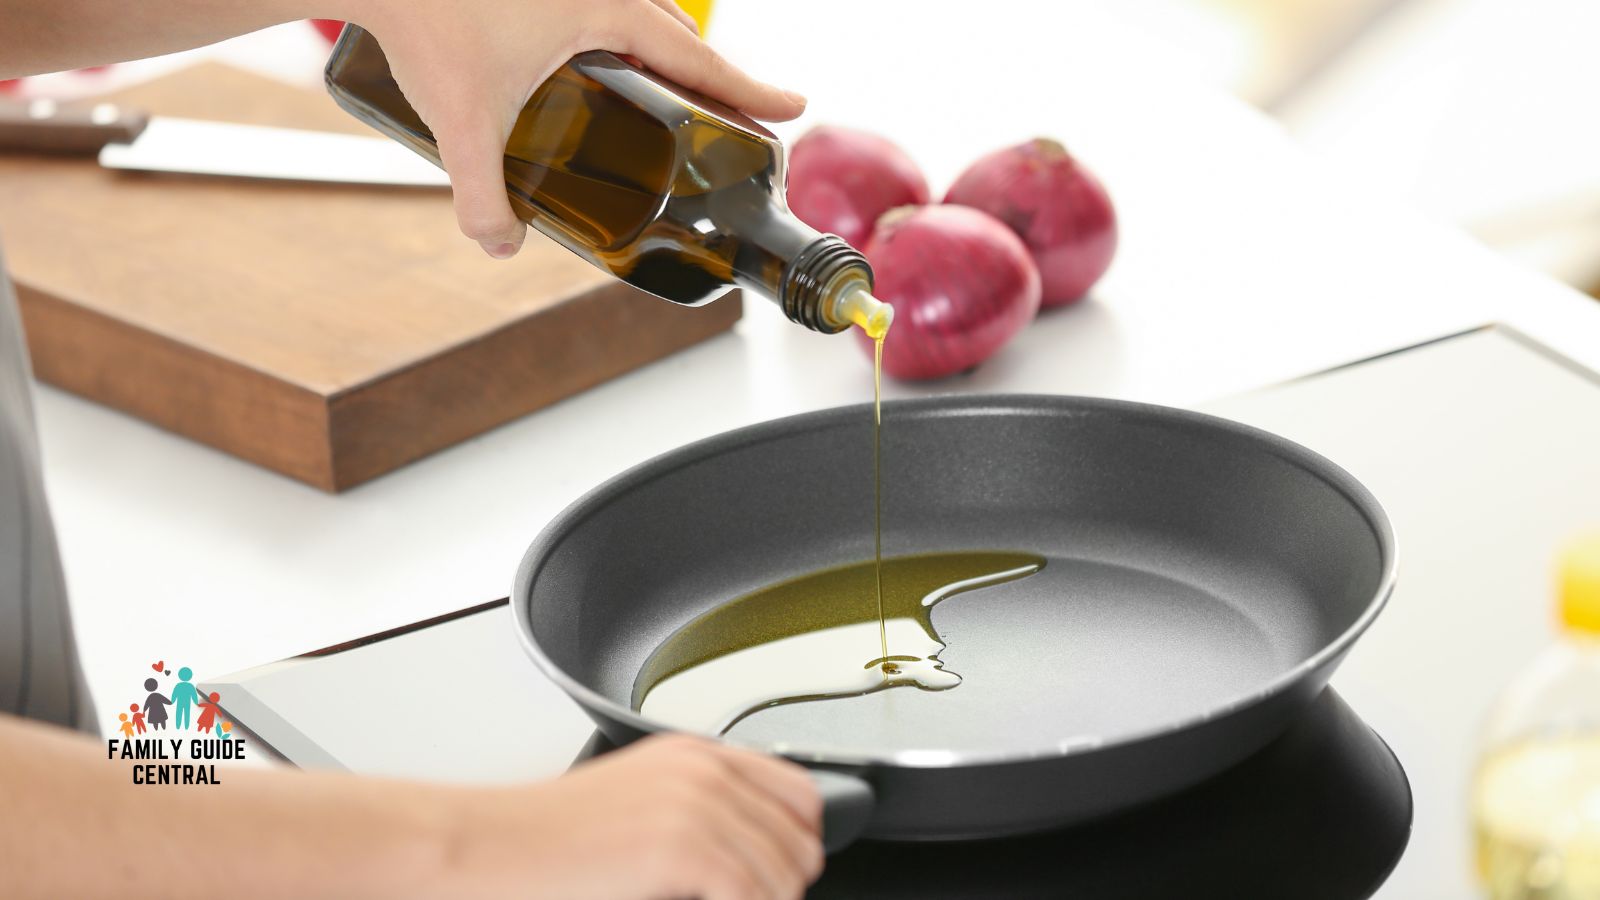 Person pouring cooking oil into nonstick pan - familyguidecentral.com